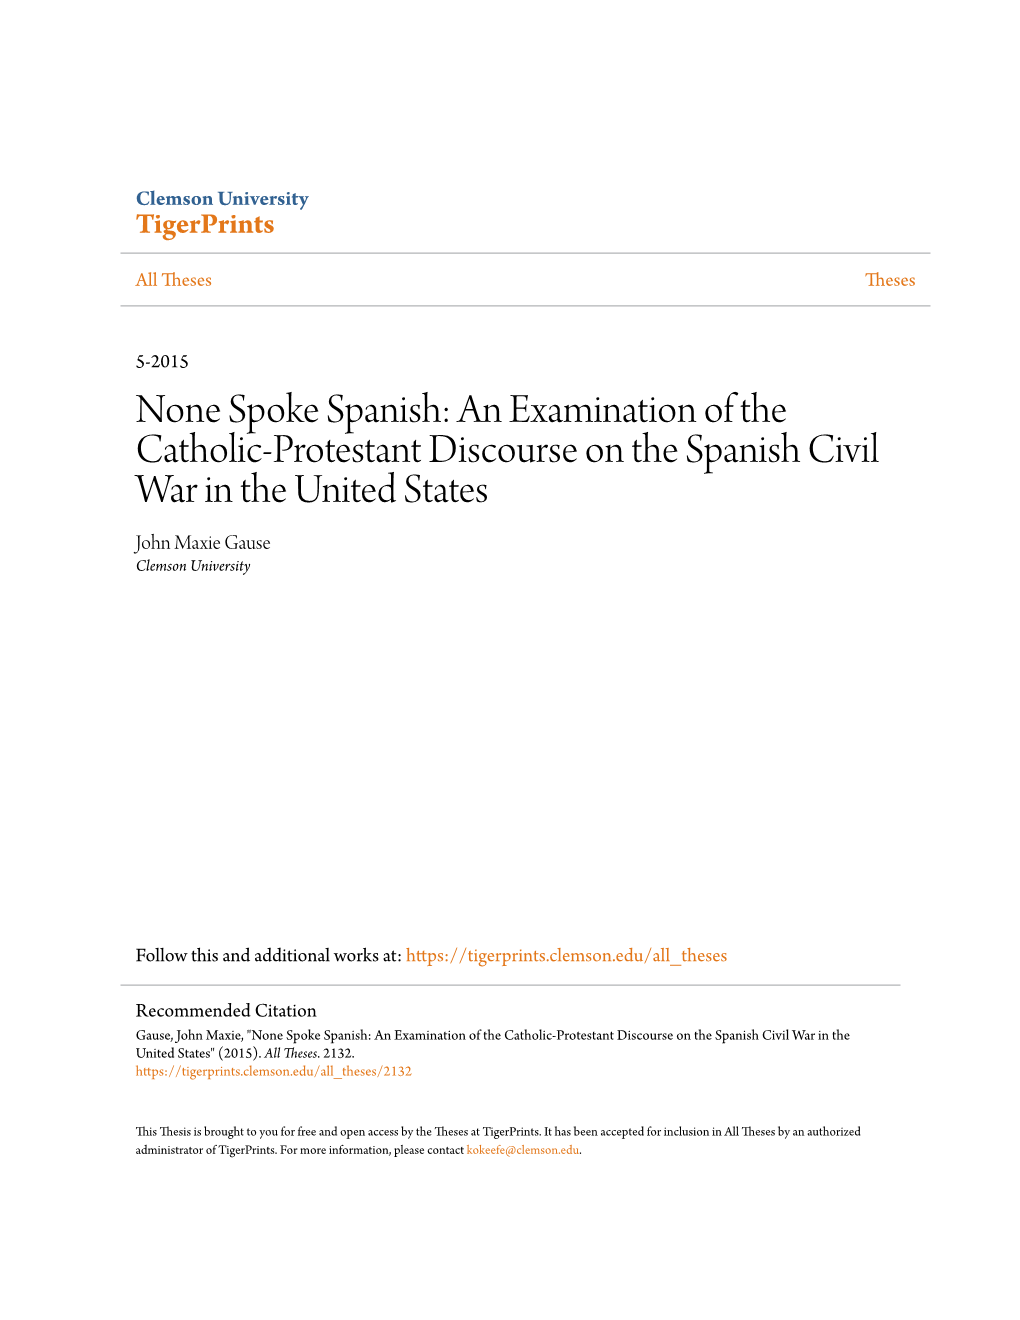 None Spoke Spanish: an Examination of the Catholic-Protestant Discourse on the Spanish Civil War in the United States John Maxie Gause Clemson University